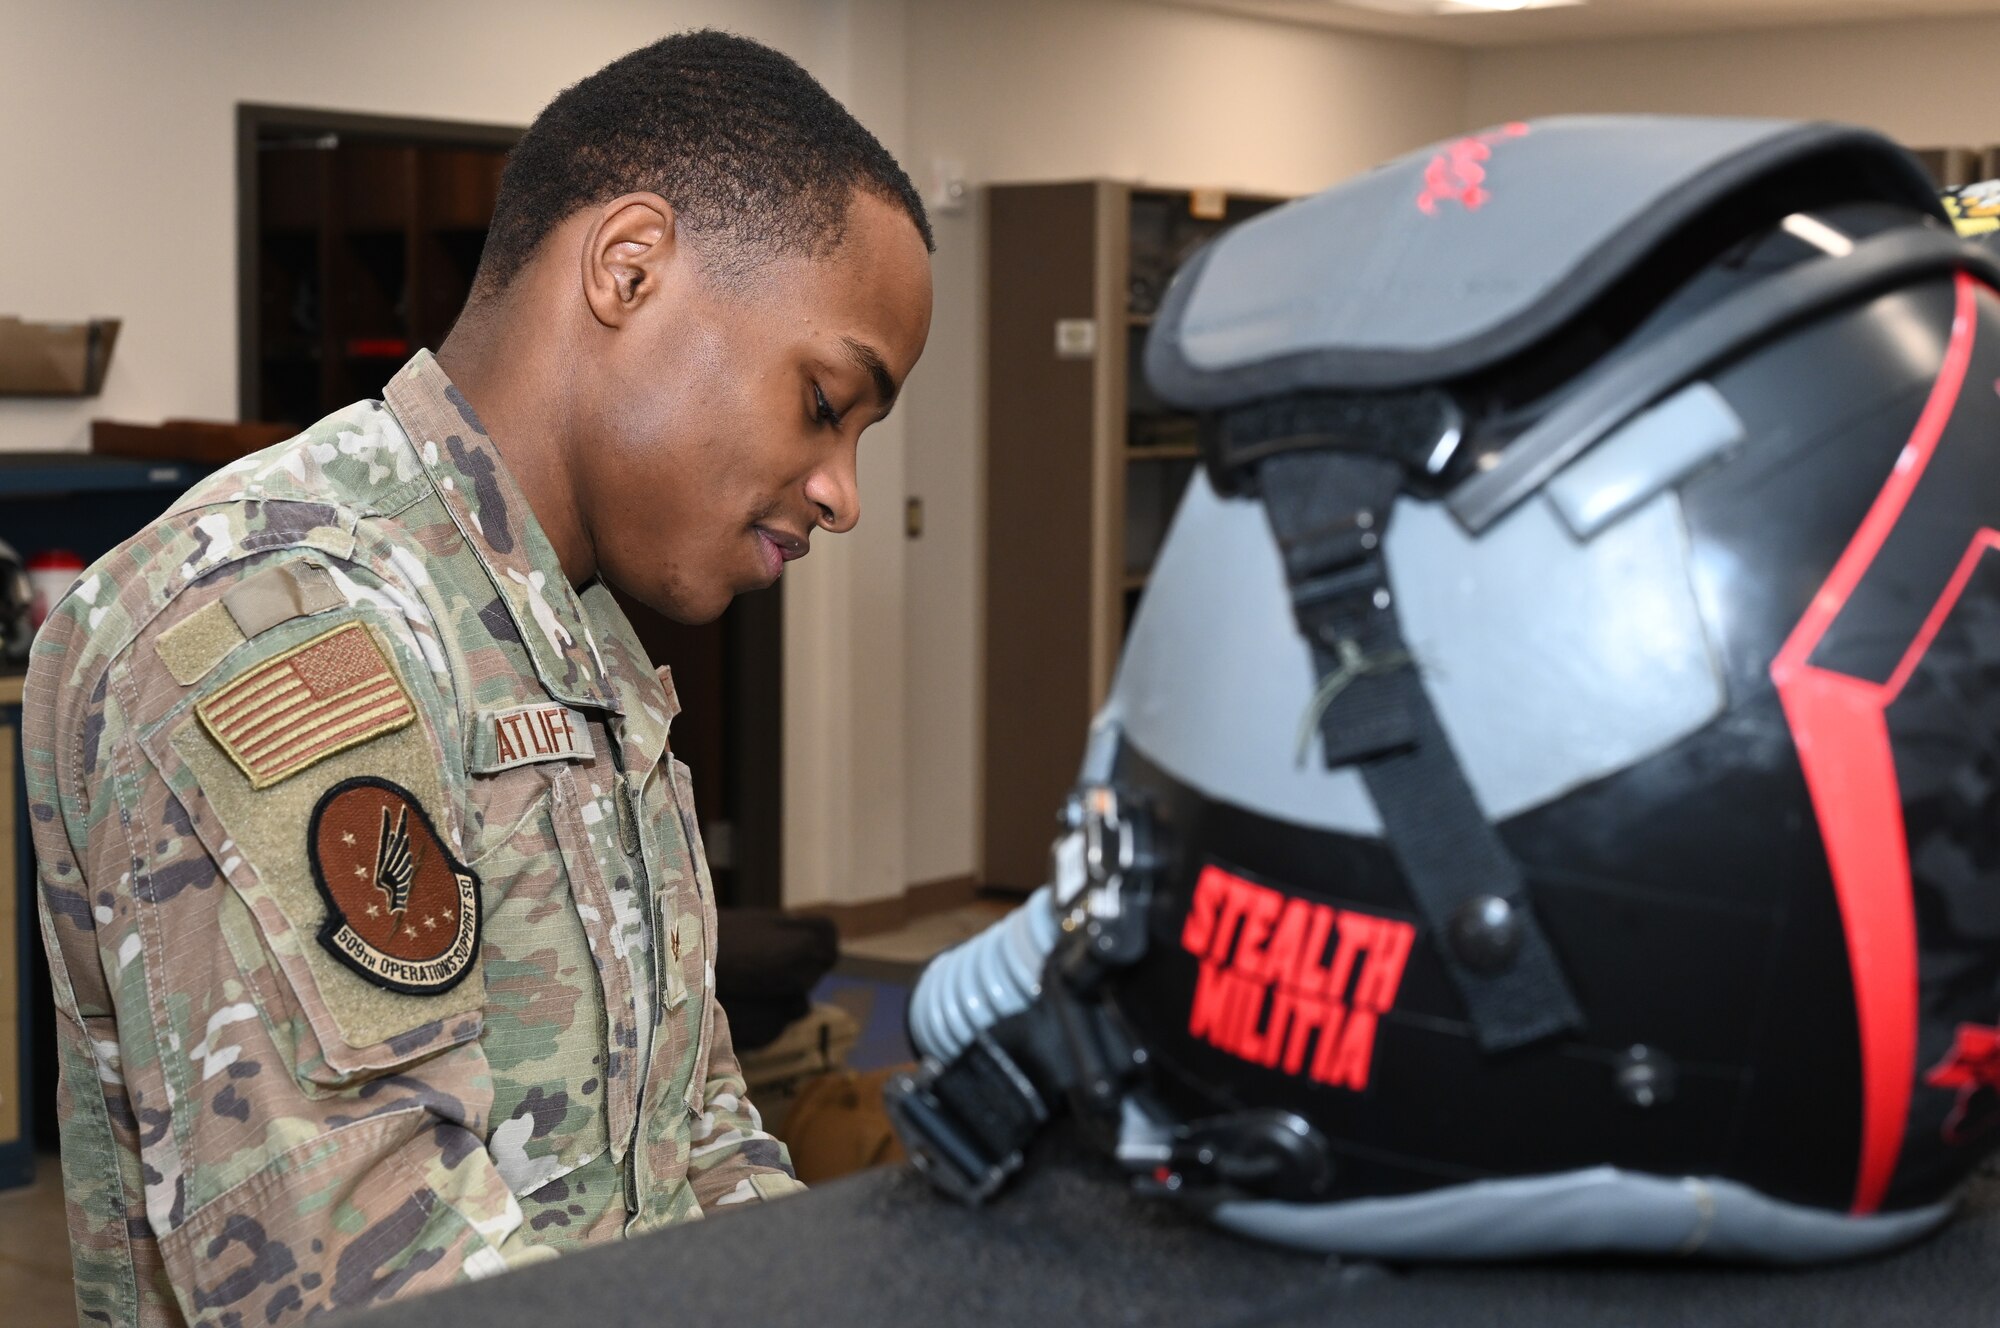 Senior Airman Anthony Ratliff, Aircrew Flight Equipment journeyman, assigned to the 509th Operations Support Squadron, tears down, inspects, cleans, reassembles, and tests oxygen masks and flight helmets in the Aircrew Flight Equipment shop at Whiteman Air Force Base, Missouri, Feb. 13, 2023. Aircrew Flight Equipment Airmen are responsible for ensuring that all flight and safety equipment is in good working order. (U.S. Air Force photo by Airman 1st Class Hailey Farrell)